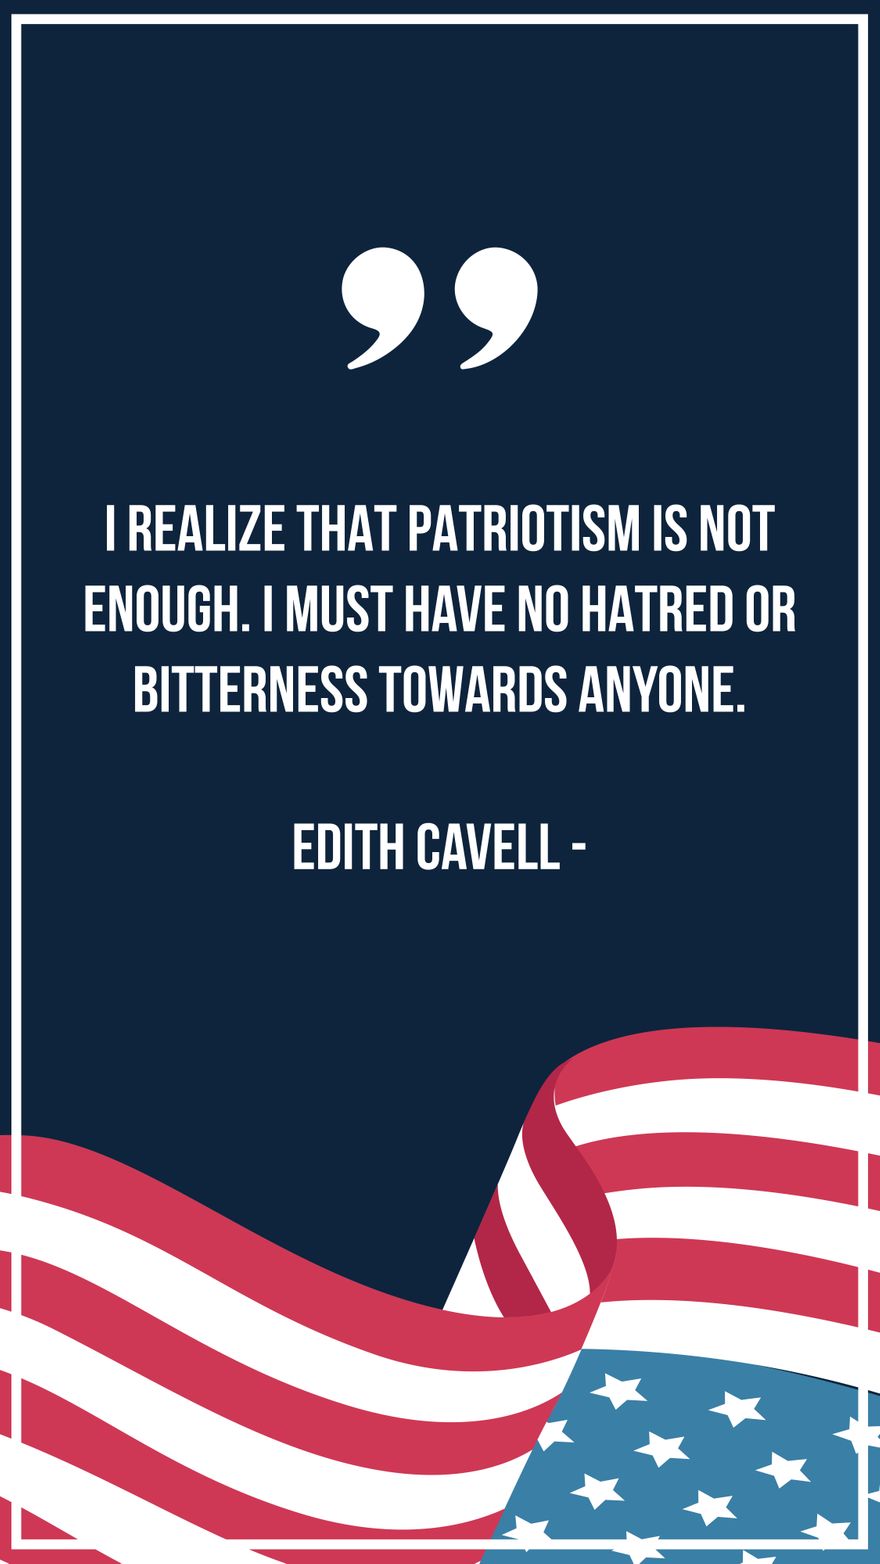 Free Edith Cavell - I realize that patriotism is not enough. I must have no hatred or bitterness towards anyone. in JPG